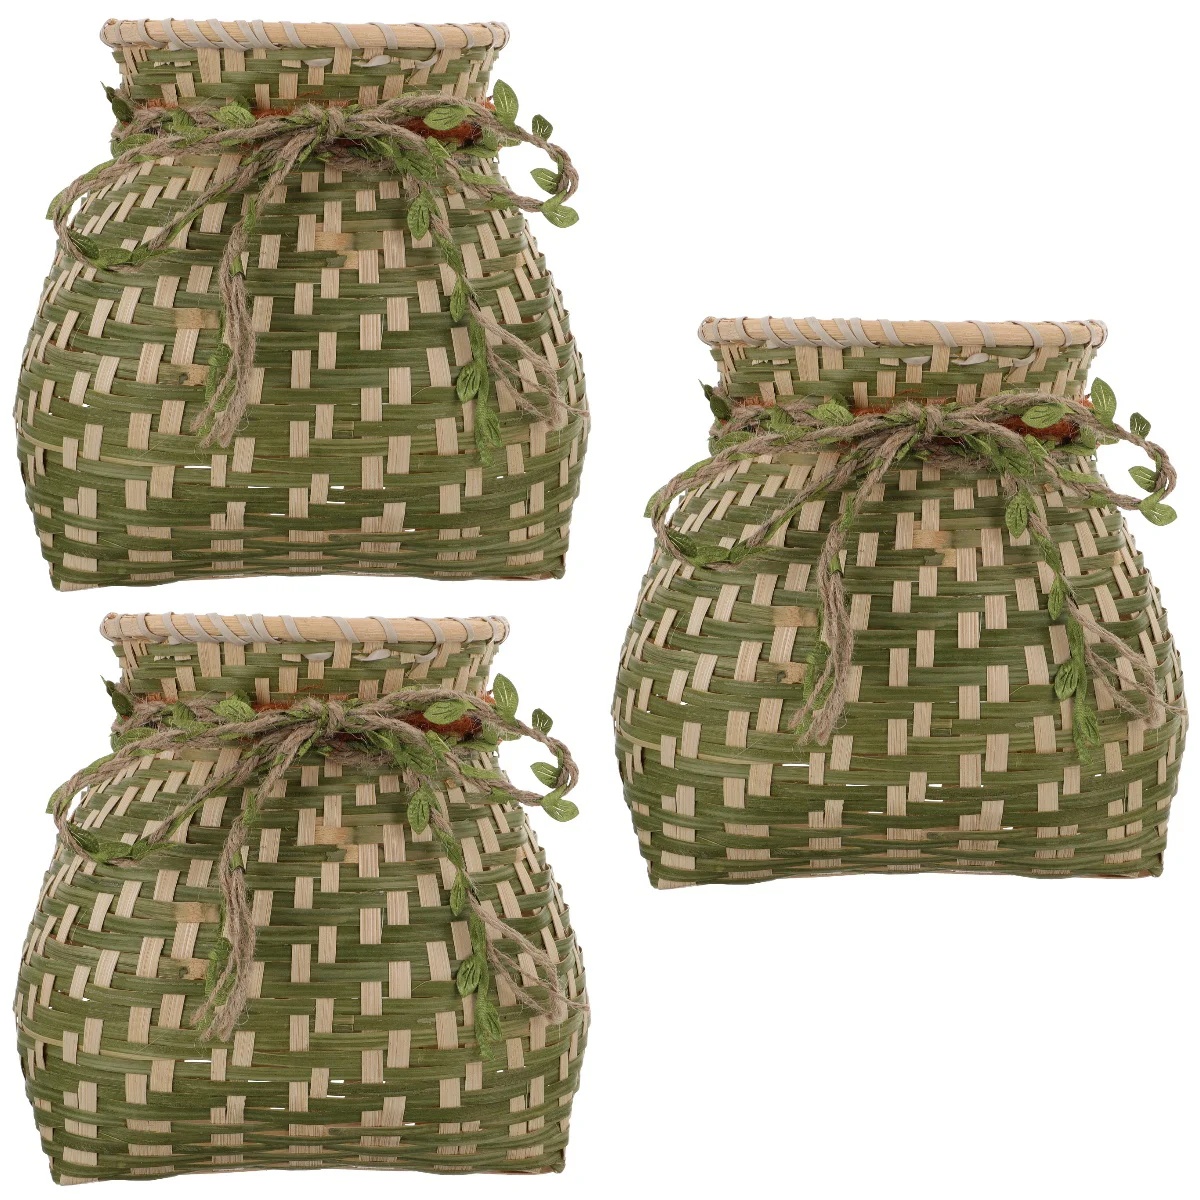 

Basket Woven Wicker Flower Storage Picnic Vase Baskets Pot Hand Container Round Easter Decorative Handmade Bamboo Gift Pots